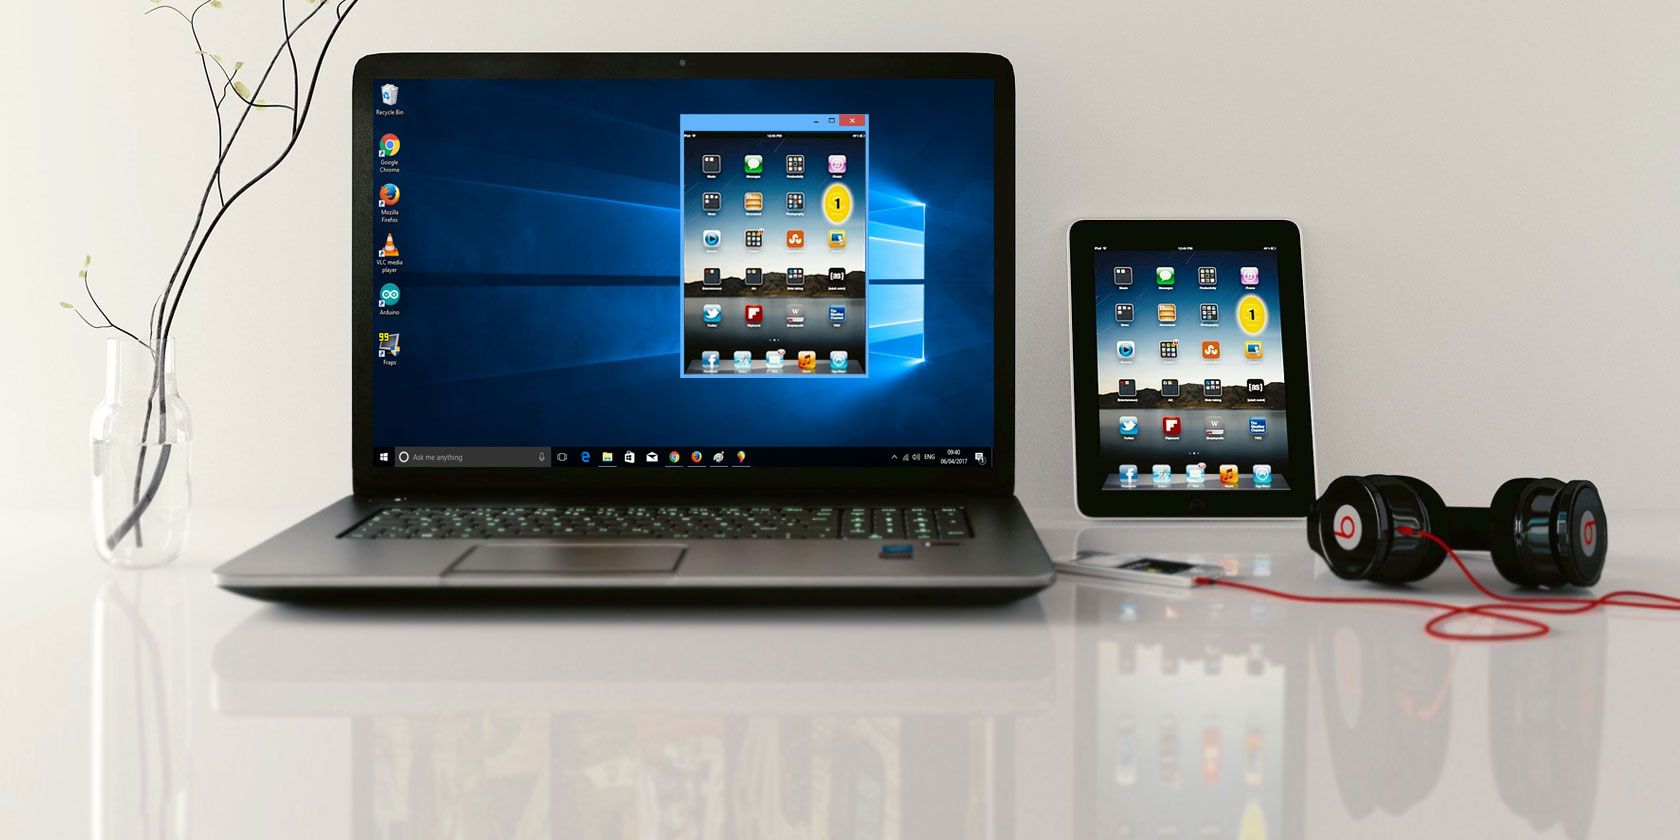 An Iphone Or Ipad Screen To A Windows Pc, How To Mirror Ipad On Pc With Usb